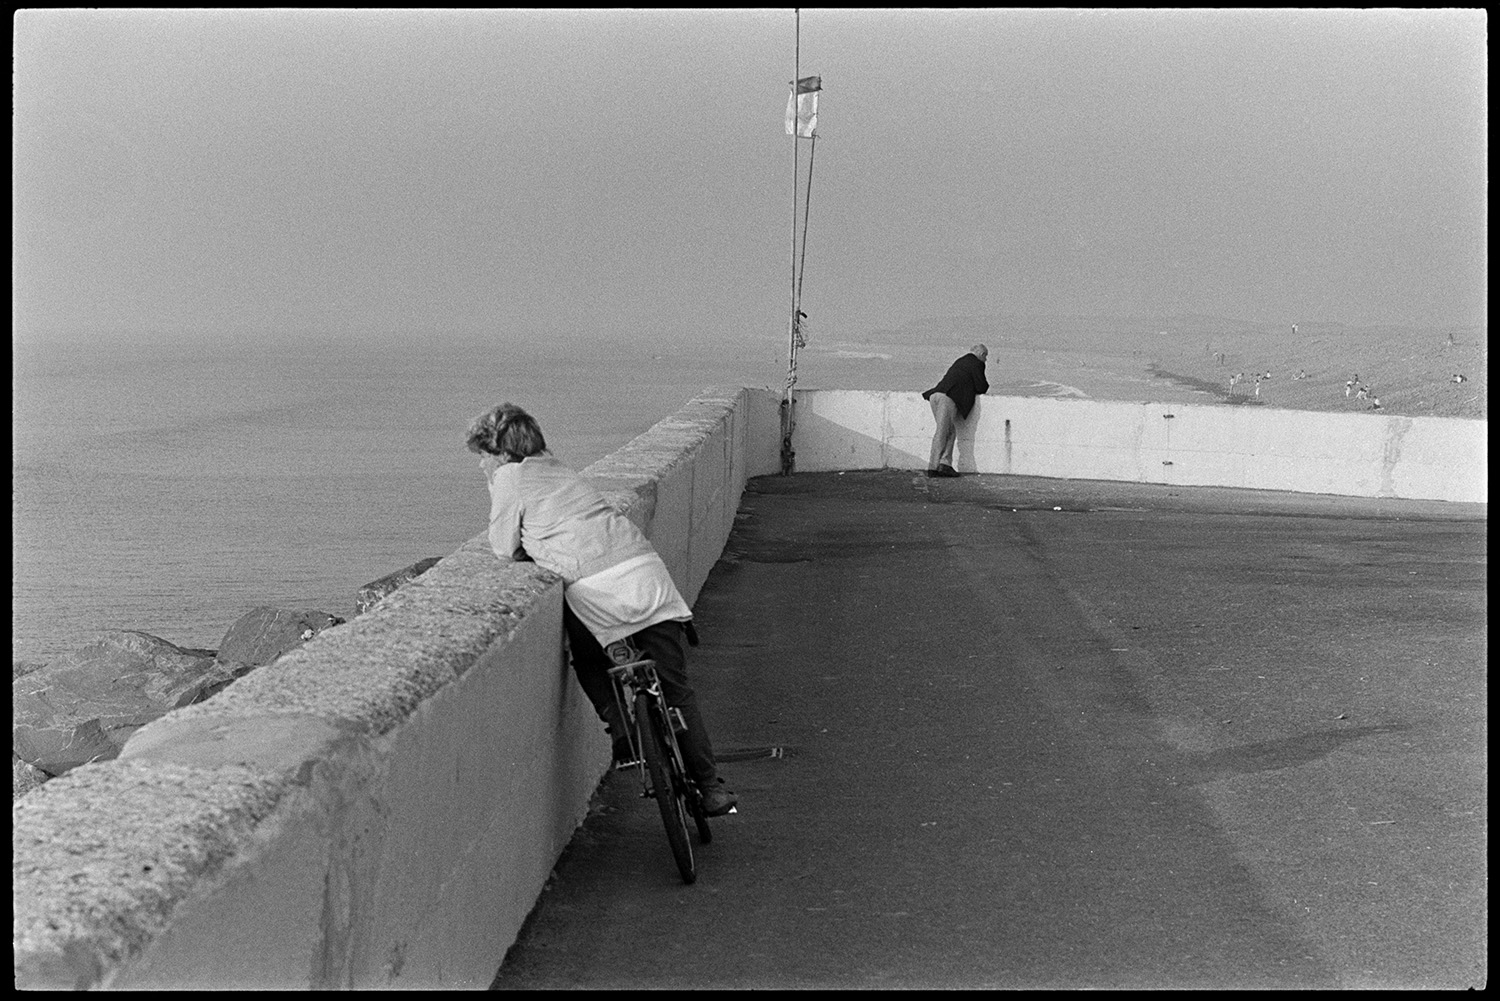 Boys leaning on sea wall looking at sea. 
[A boy on a bicycle leaning on the sea wall at Westward Ho! and looking out to sea. A man is also leaning on the sea wall in the background.]